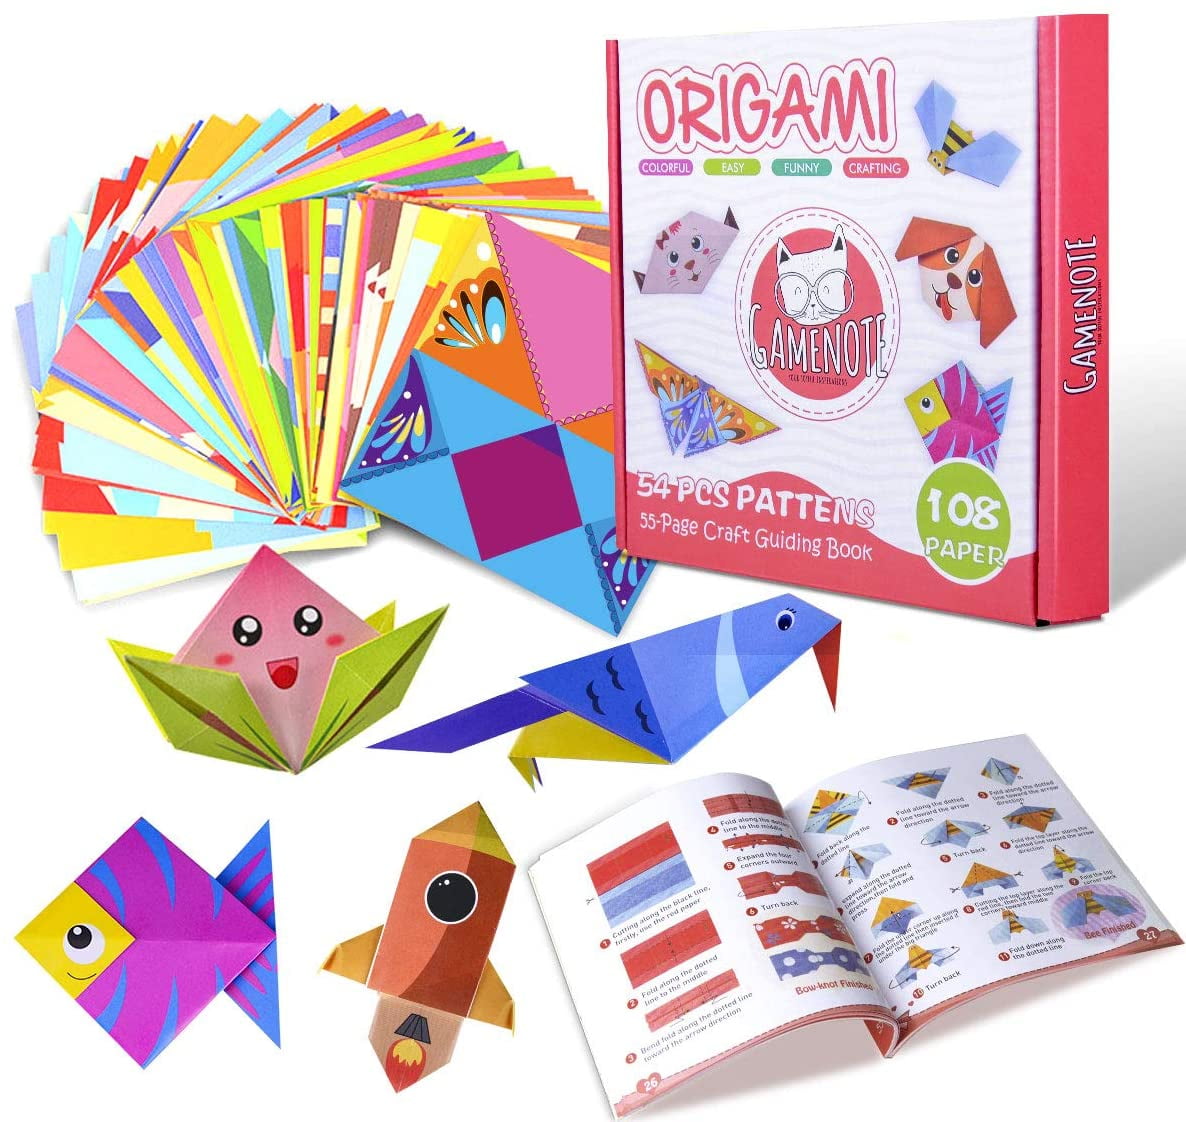 Sunerly Colourful Origami Kit with 14-Page Instructional Book 74 Double Sided Vivid Origami Papers 27 Projects Origami for Kids Beginners Trainning and School Craft Lessons